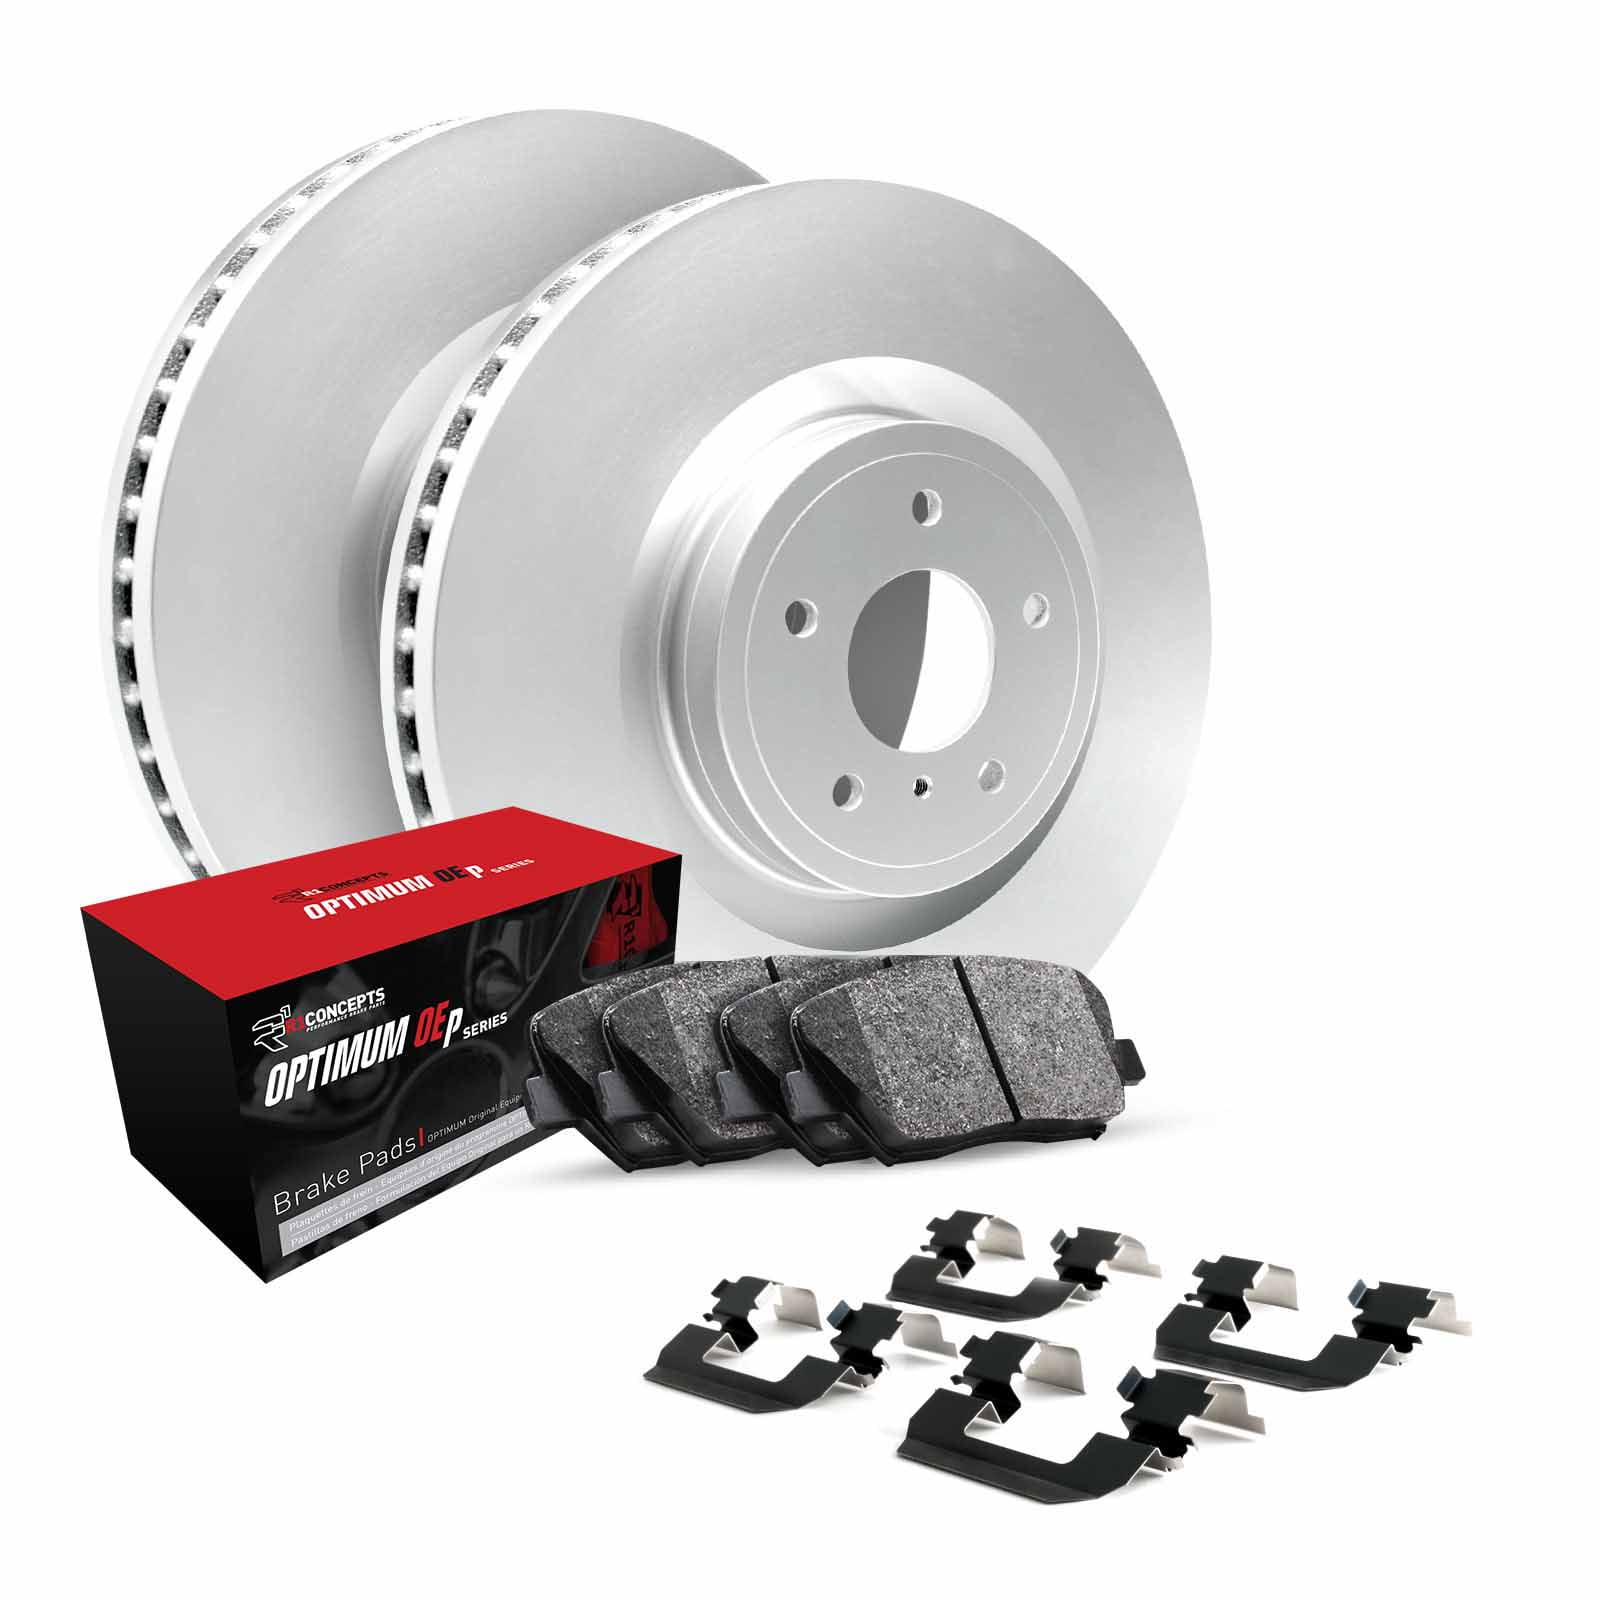 R1 Concepts Front Brakes and Rotors Kit |Front Brake Pads| Brake Rotors and  Pads| Optimum OEp Brake Pads and Rotors |Hardware Kit|fits 2004-2006